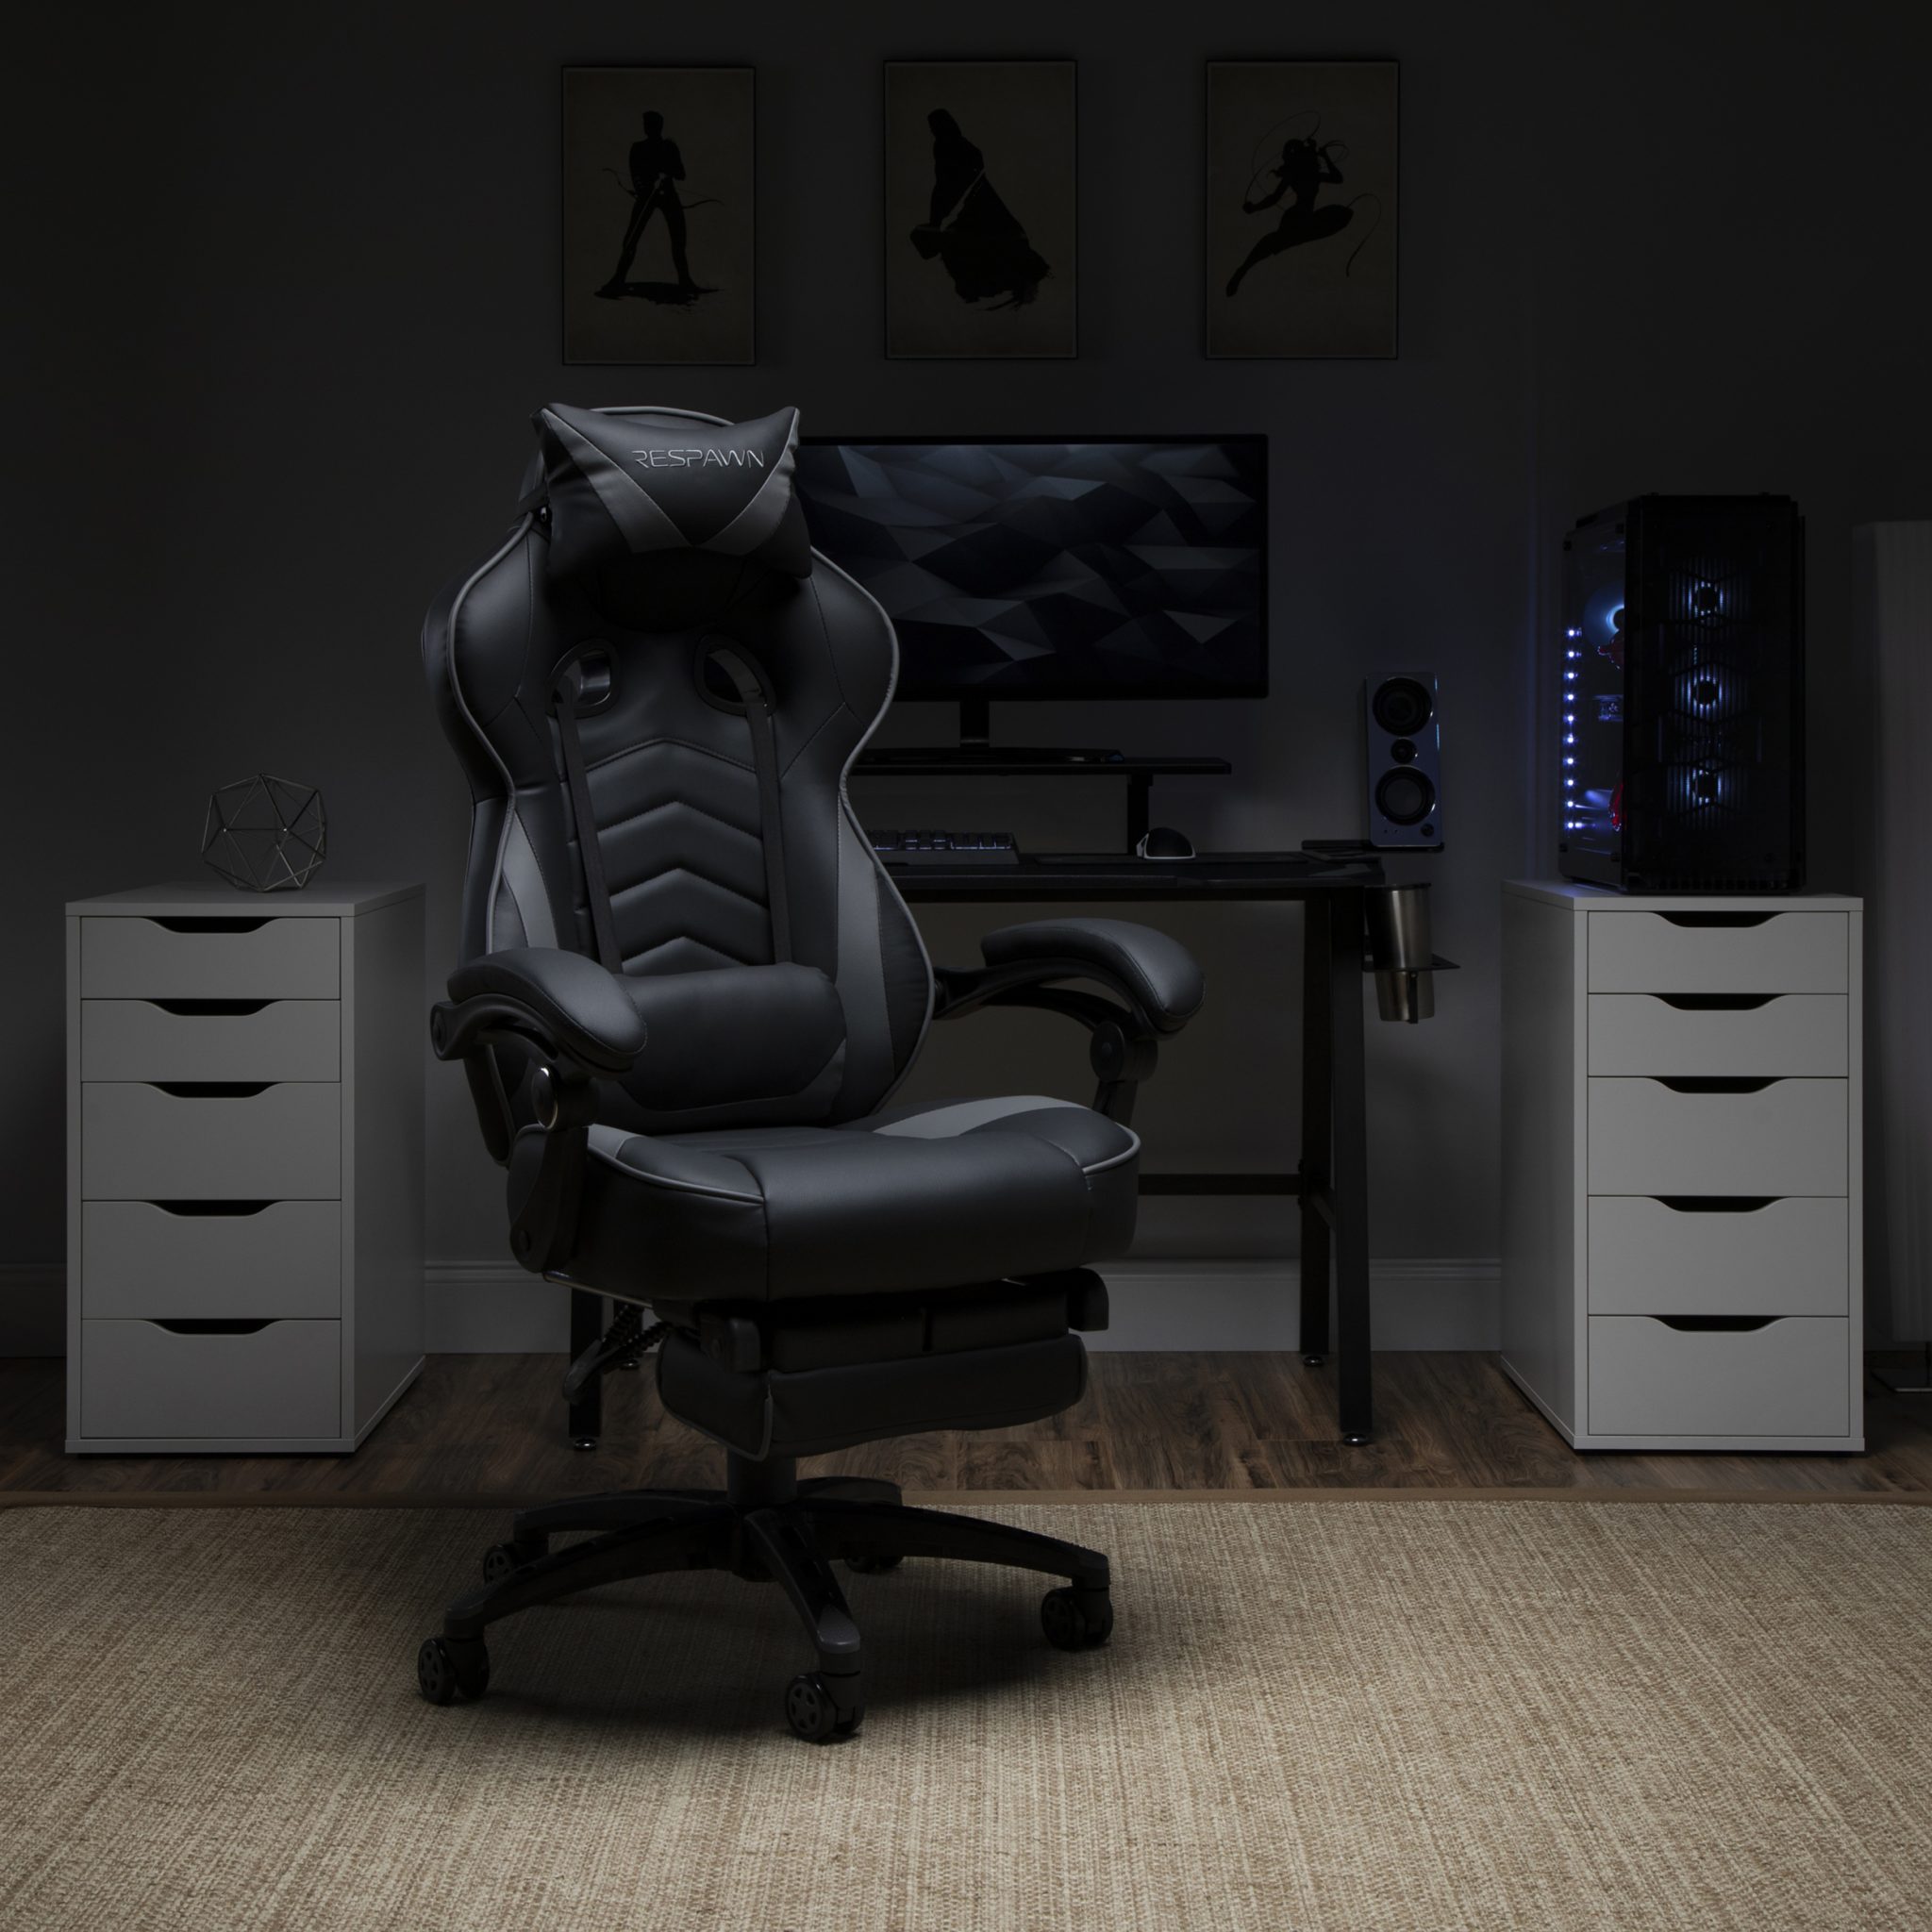 RESPAWN 110 Racing Style Gaming Chair, Reclining Ergonomic Leather